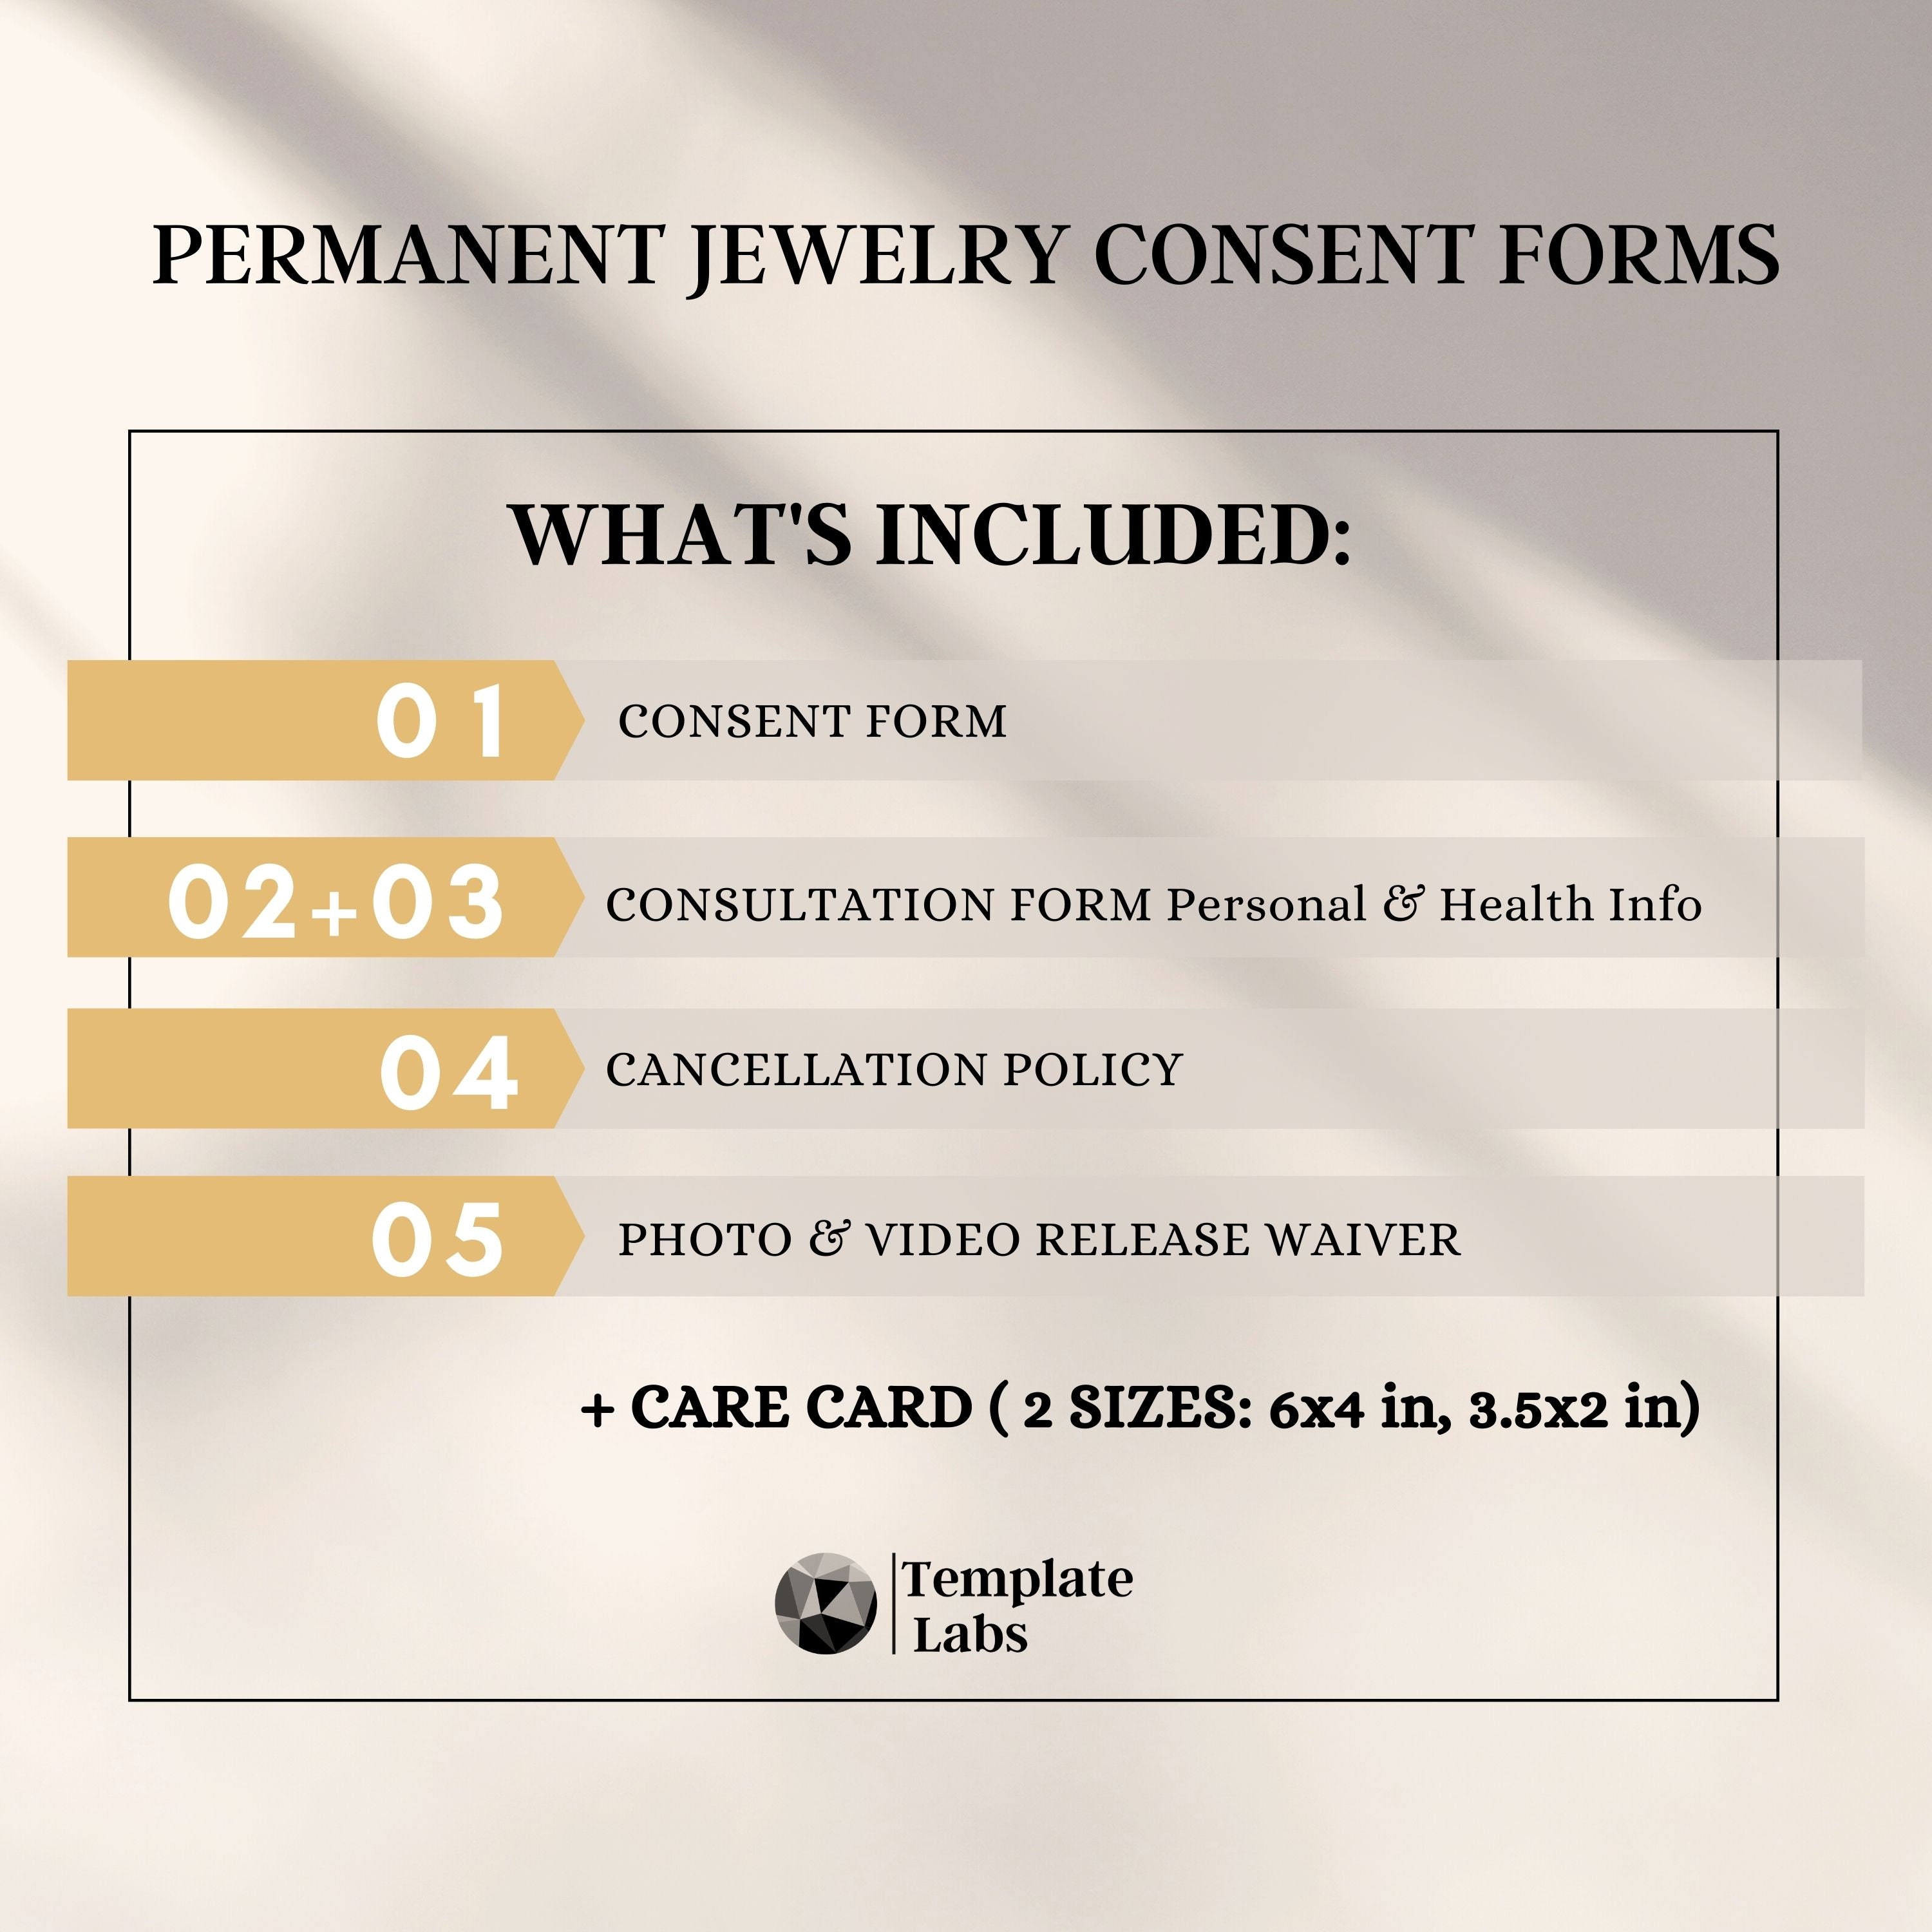 How to Get Certified in Permanent Jewelry: Myth Vs. Fact